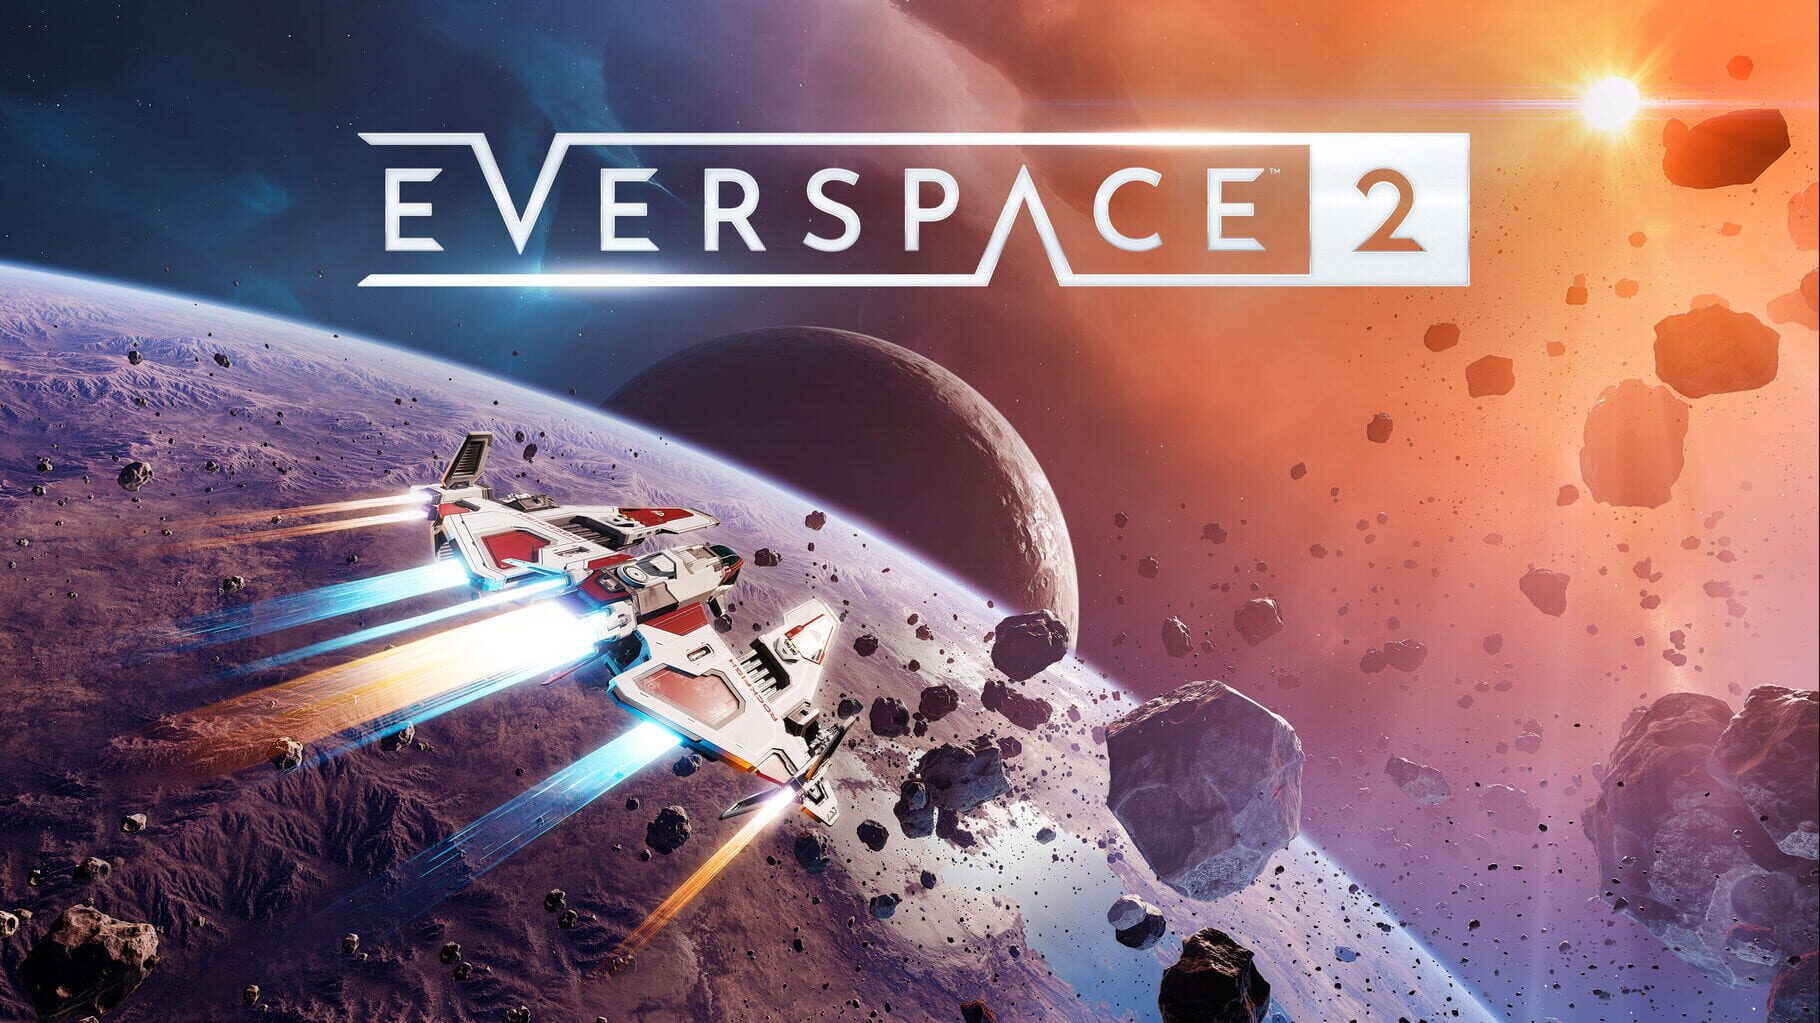 Artwork for Everspace 2